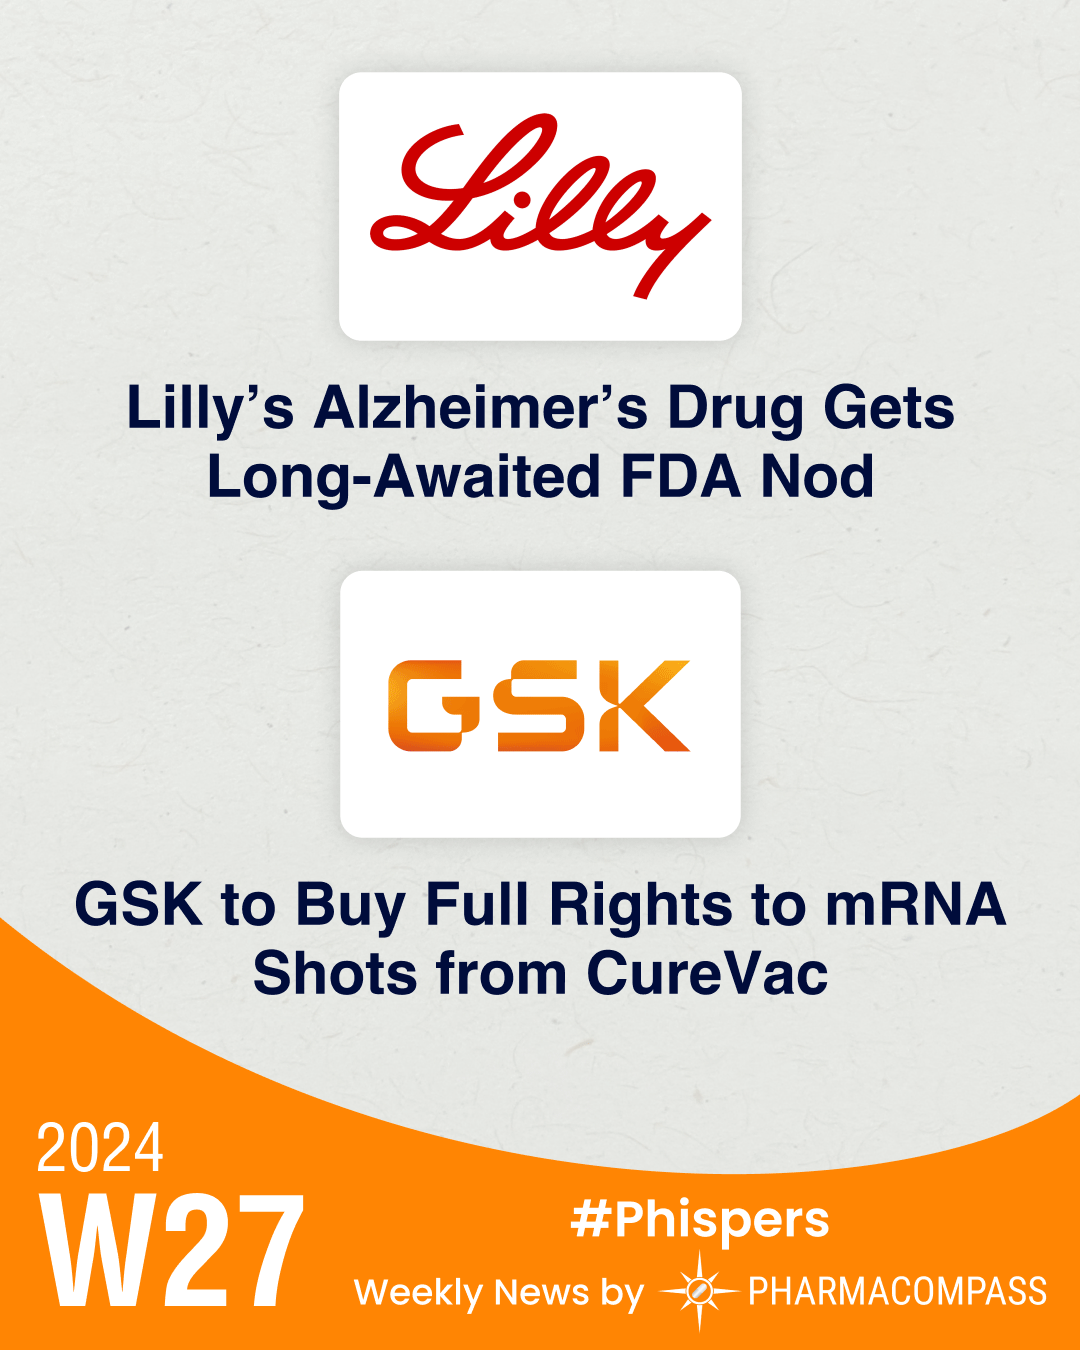 Lilly’s Alzheimer’s drug gets FDA nod; GSK buys rights to mRNA vaccines from Curevac for US$ 1.56 bn